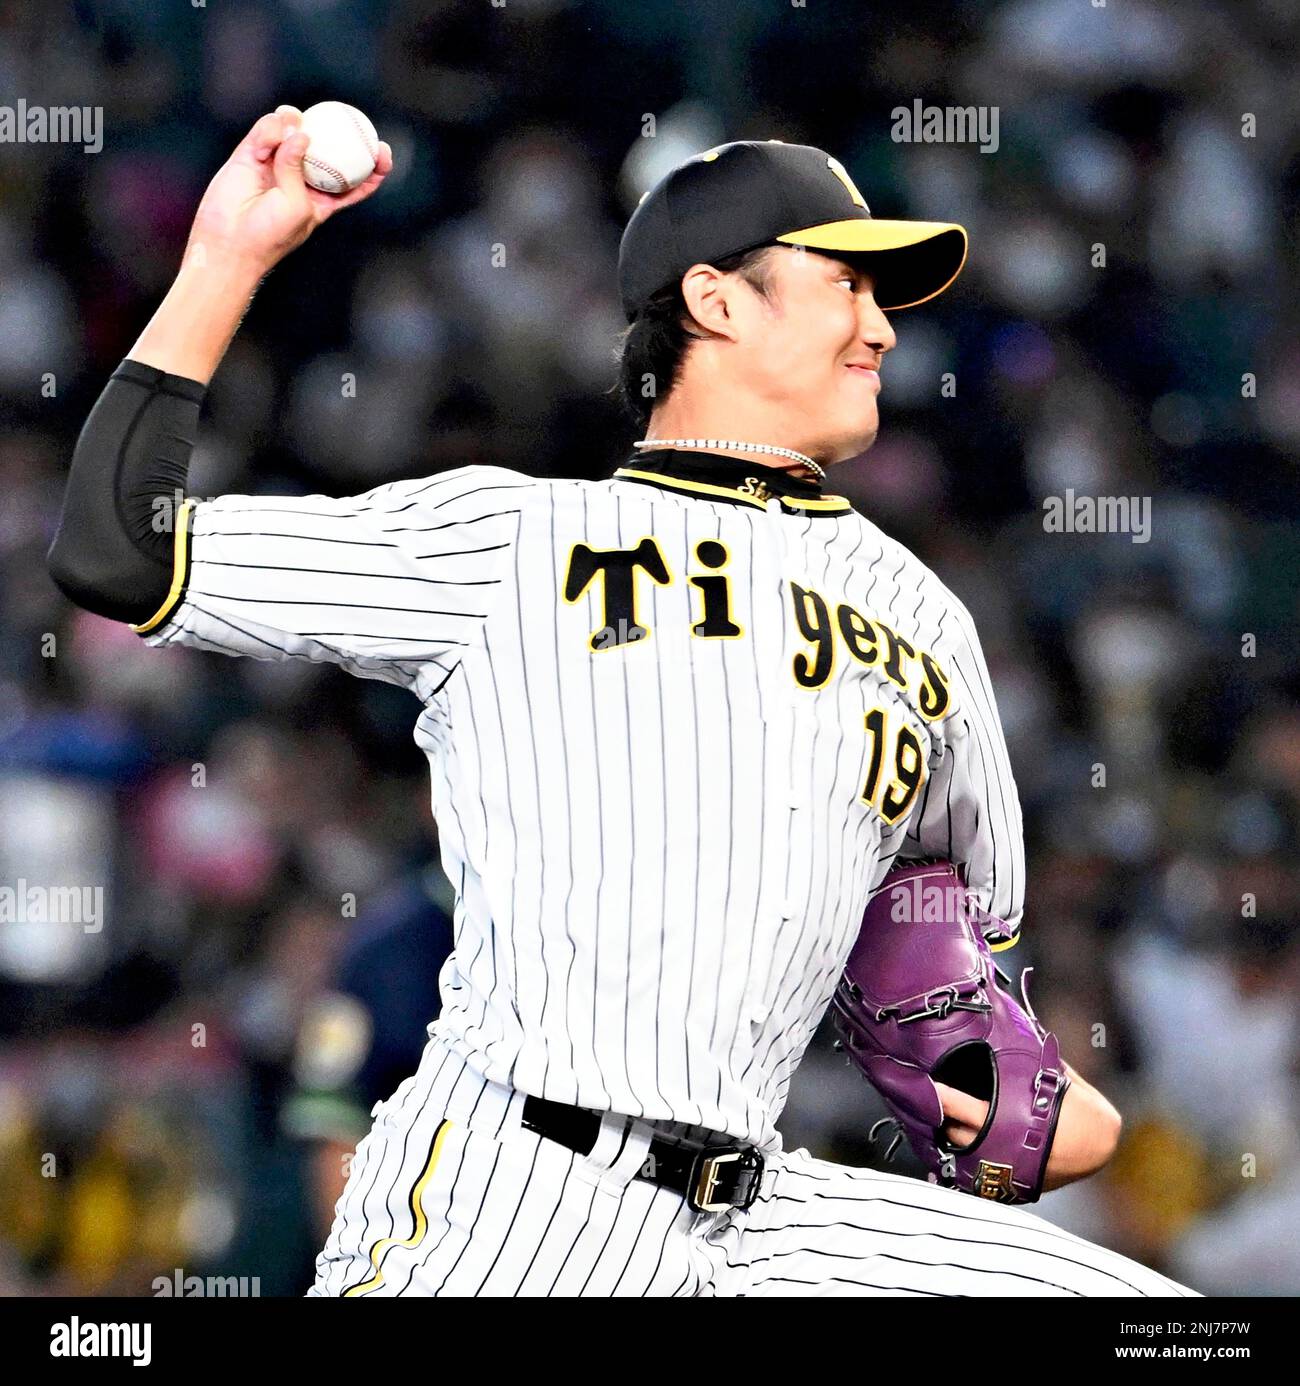 Hanshin Tigers pitcher Shintaro Fujinami throws a ball in a Central League baseball game against the Yomiuri Giants at Koshien Stadium in Hyogo Prefecture on September 18, 2022